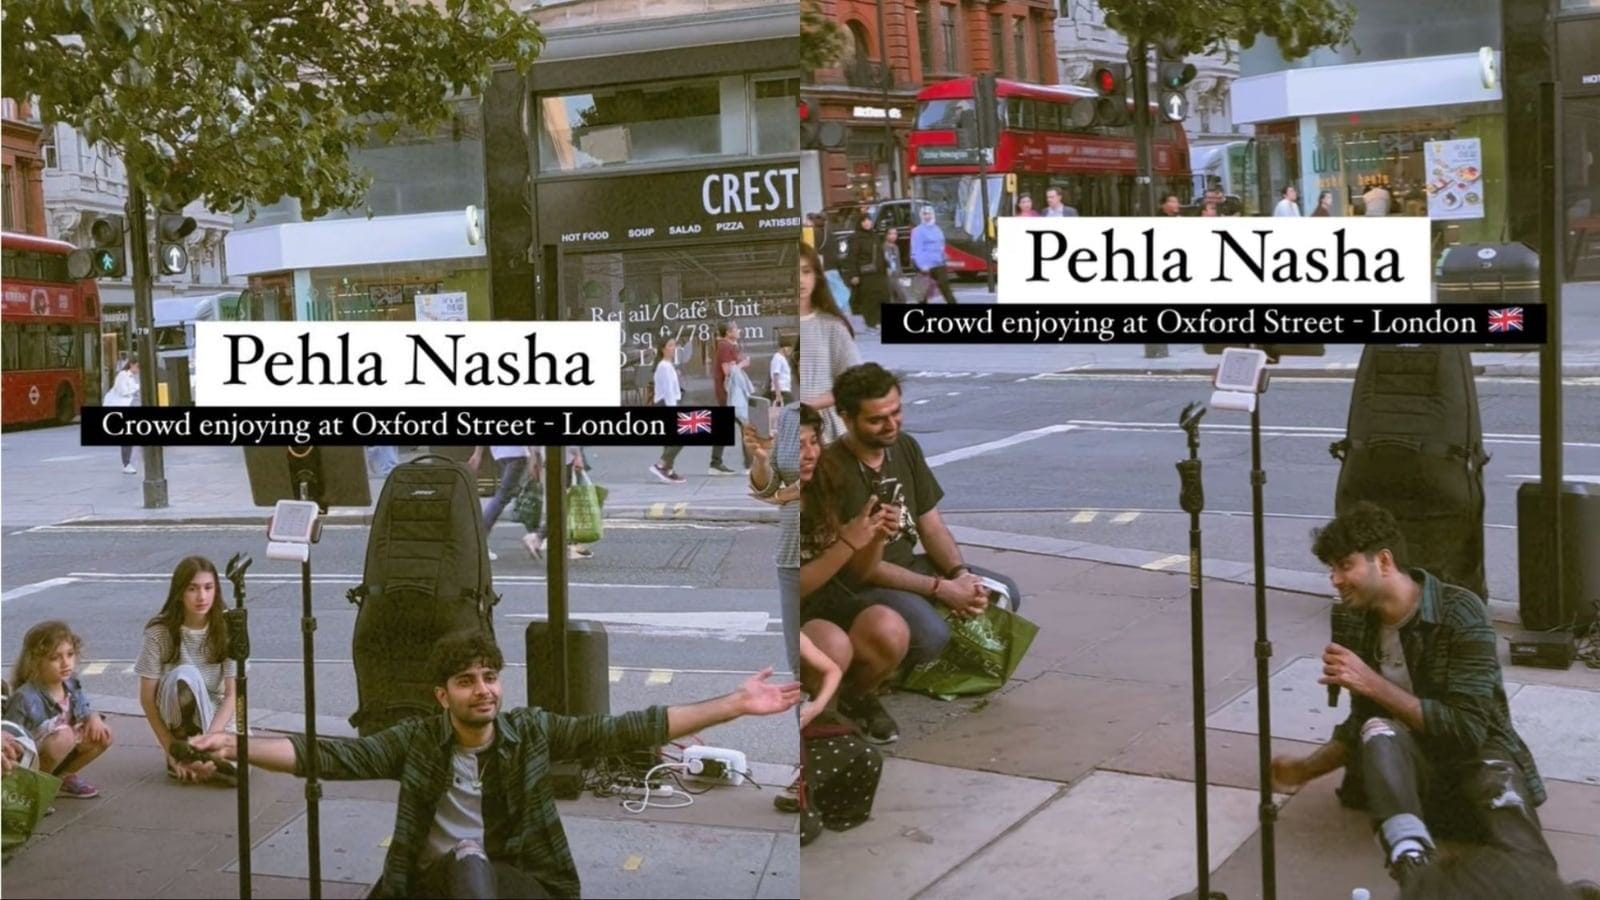 Indian busker sings Pehla Nasha on London’s Oxford Street, video hits over 17 million views